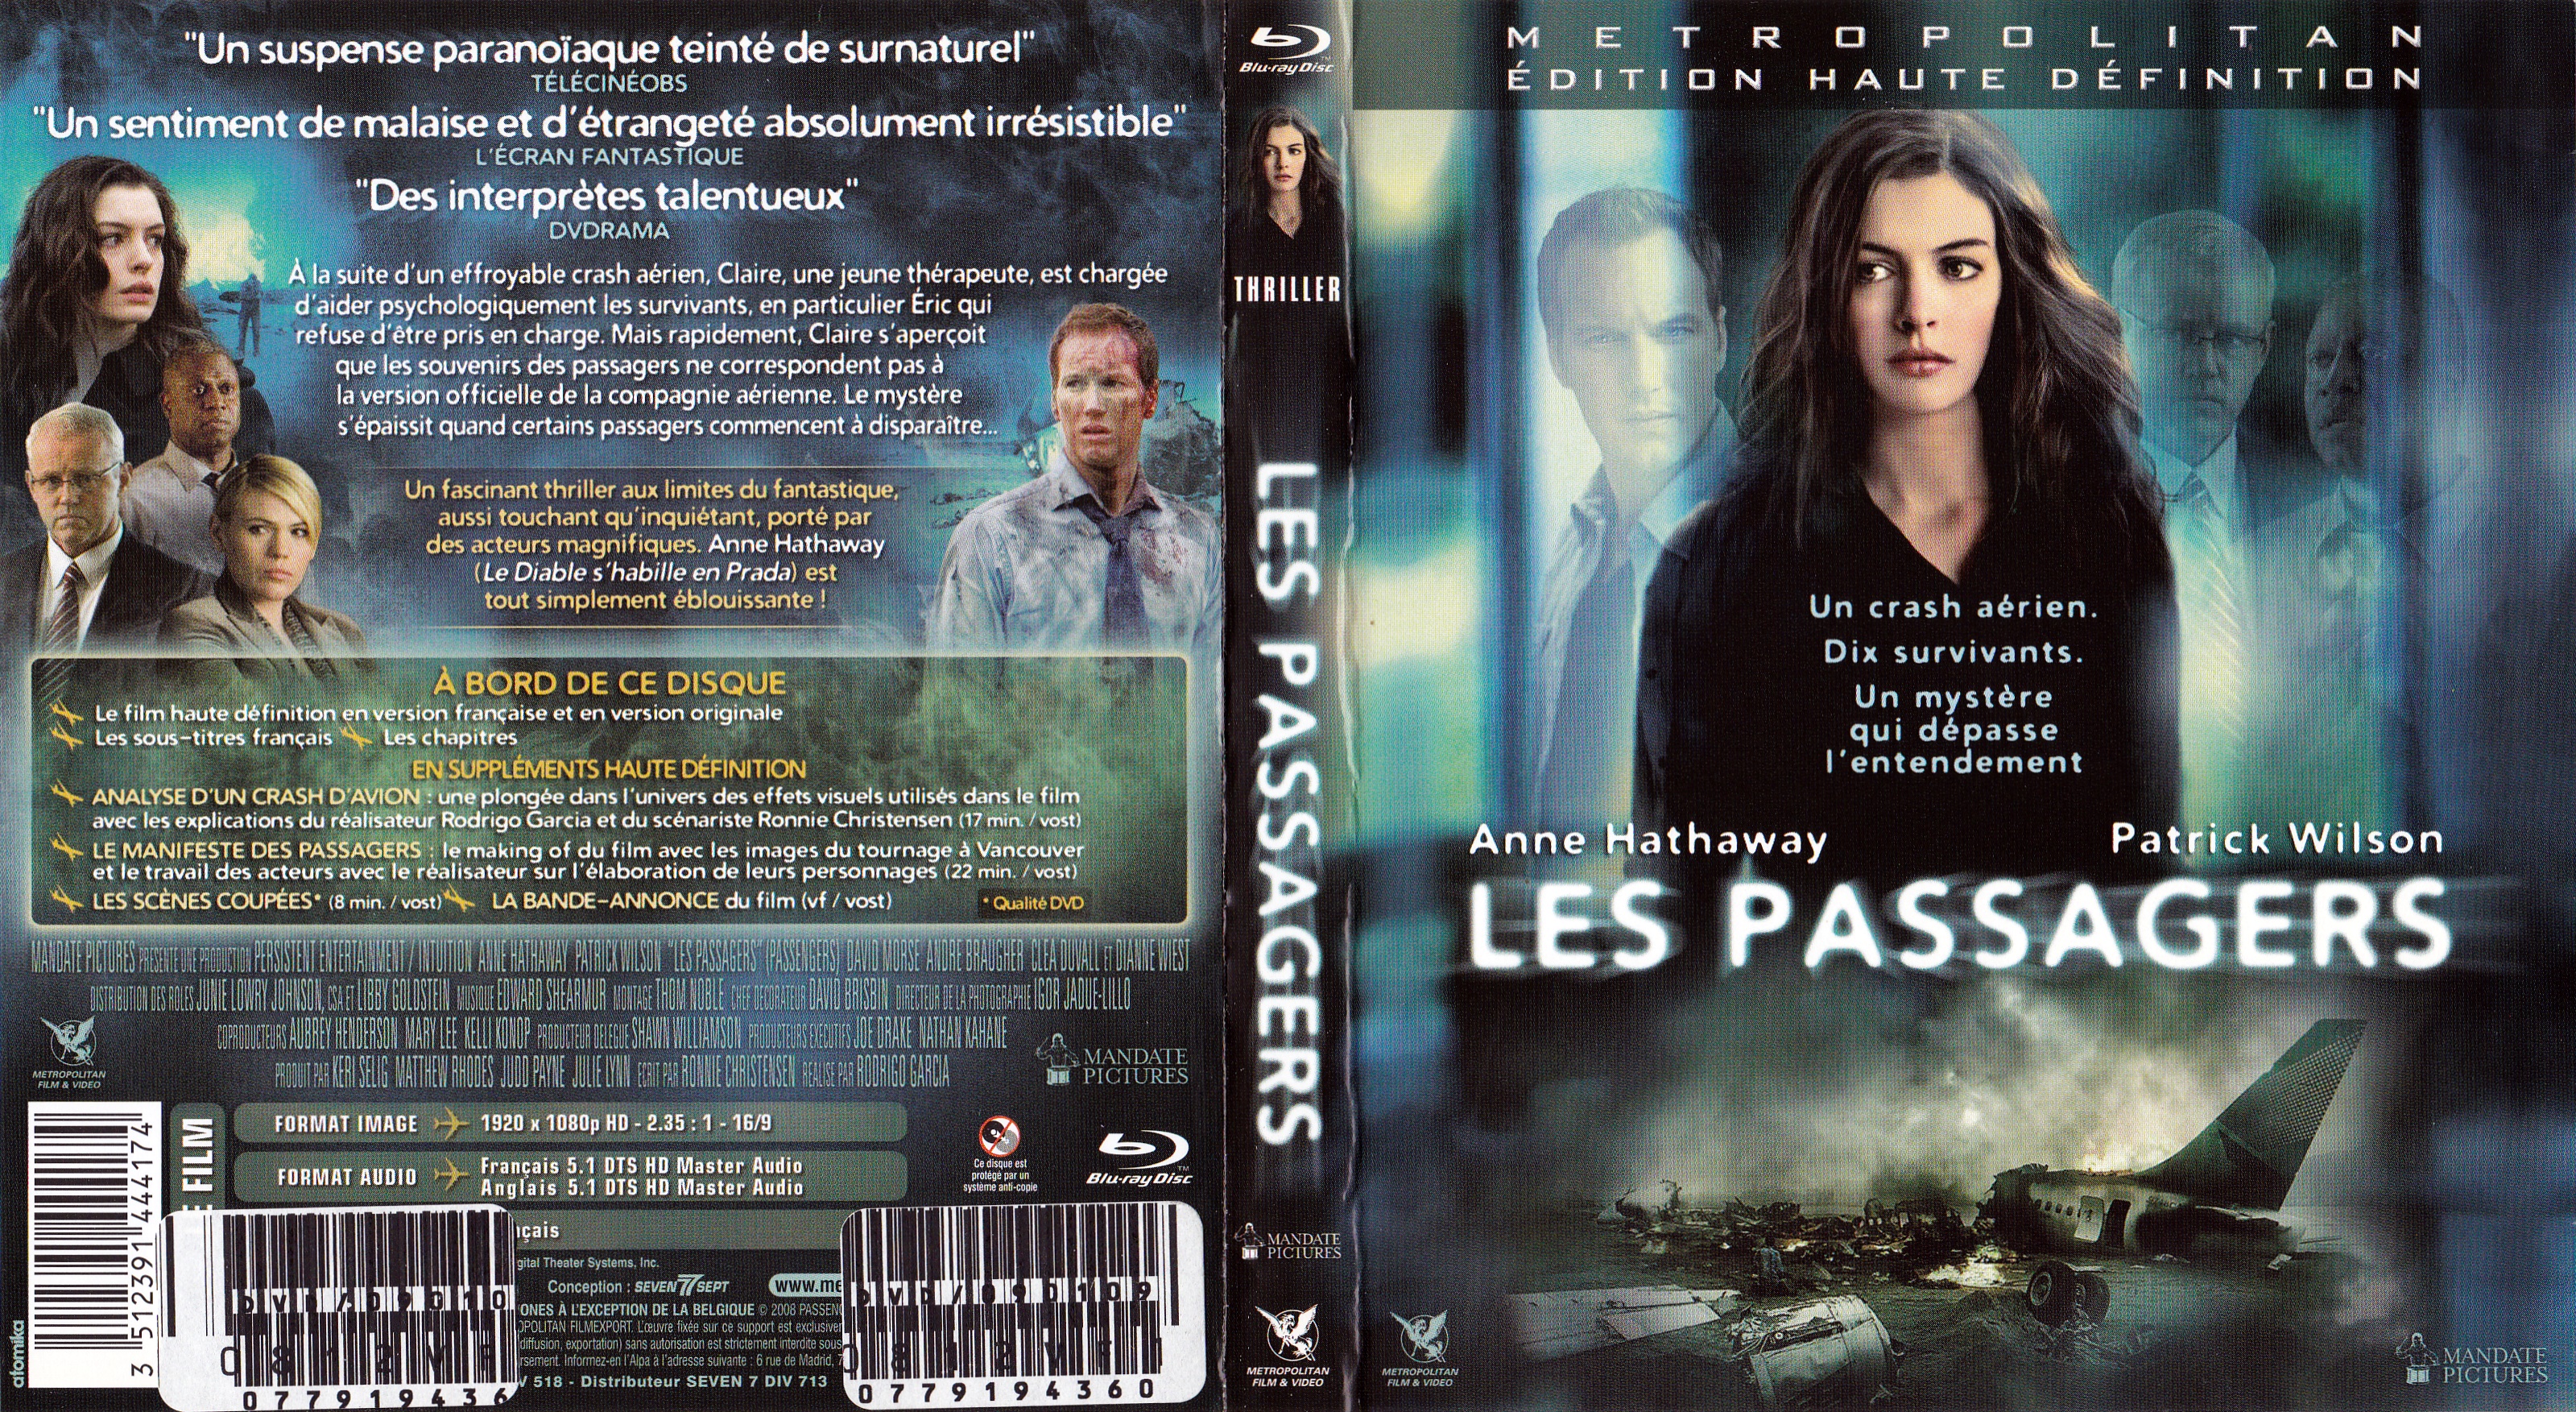 Jaquette DVD Les passagers (BLU-RAY)